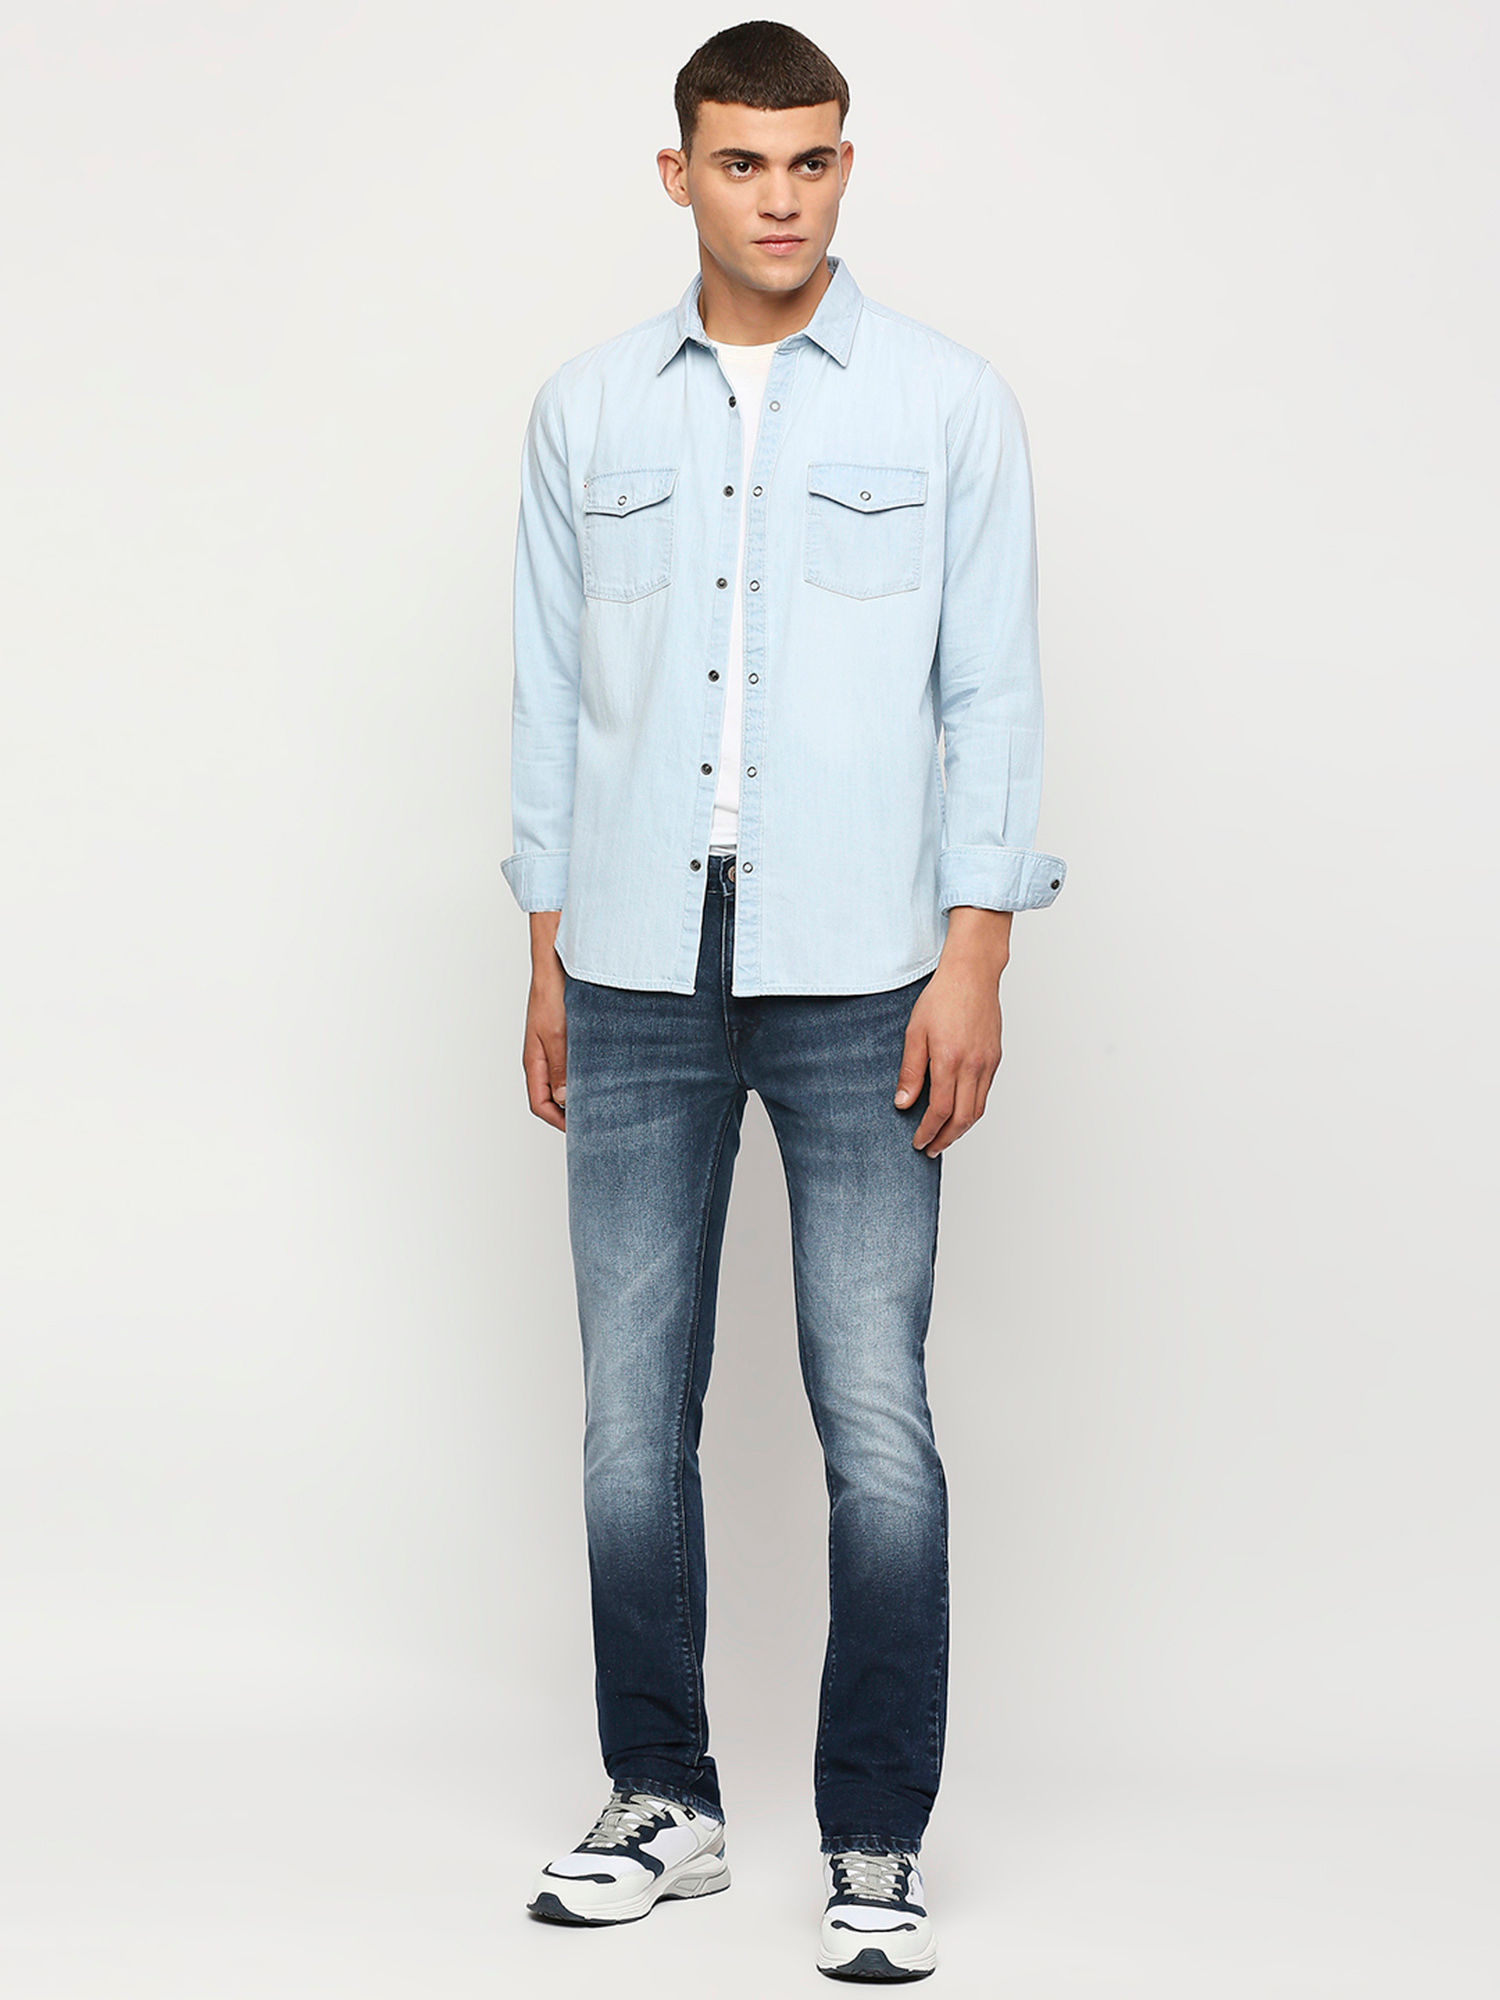 Axel's Sweetwater Stone Wash Denim Shirt In Indigo | Shirts, Denim shirt, Denim  wash